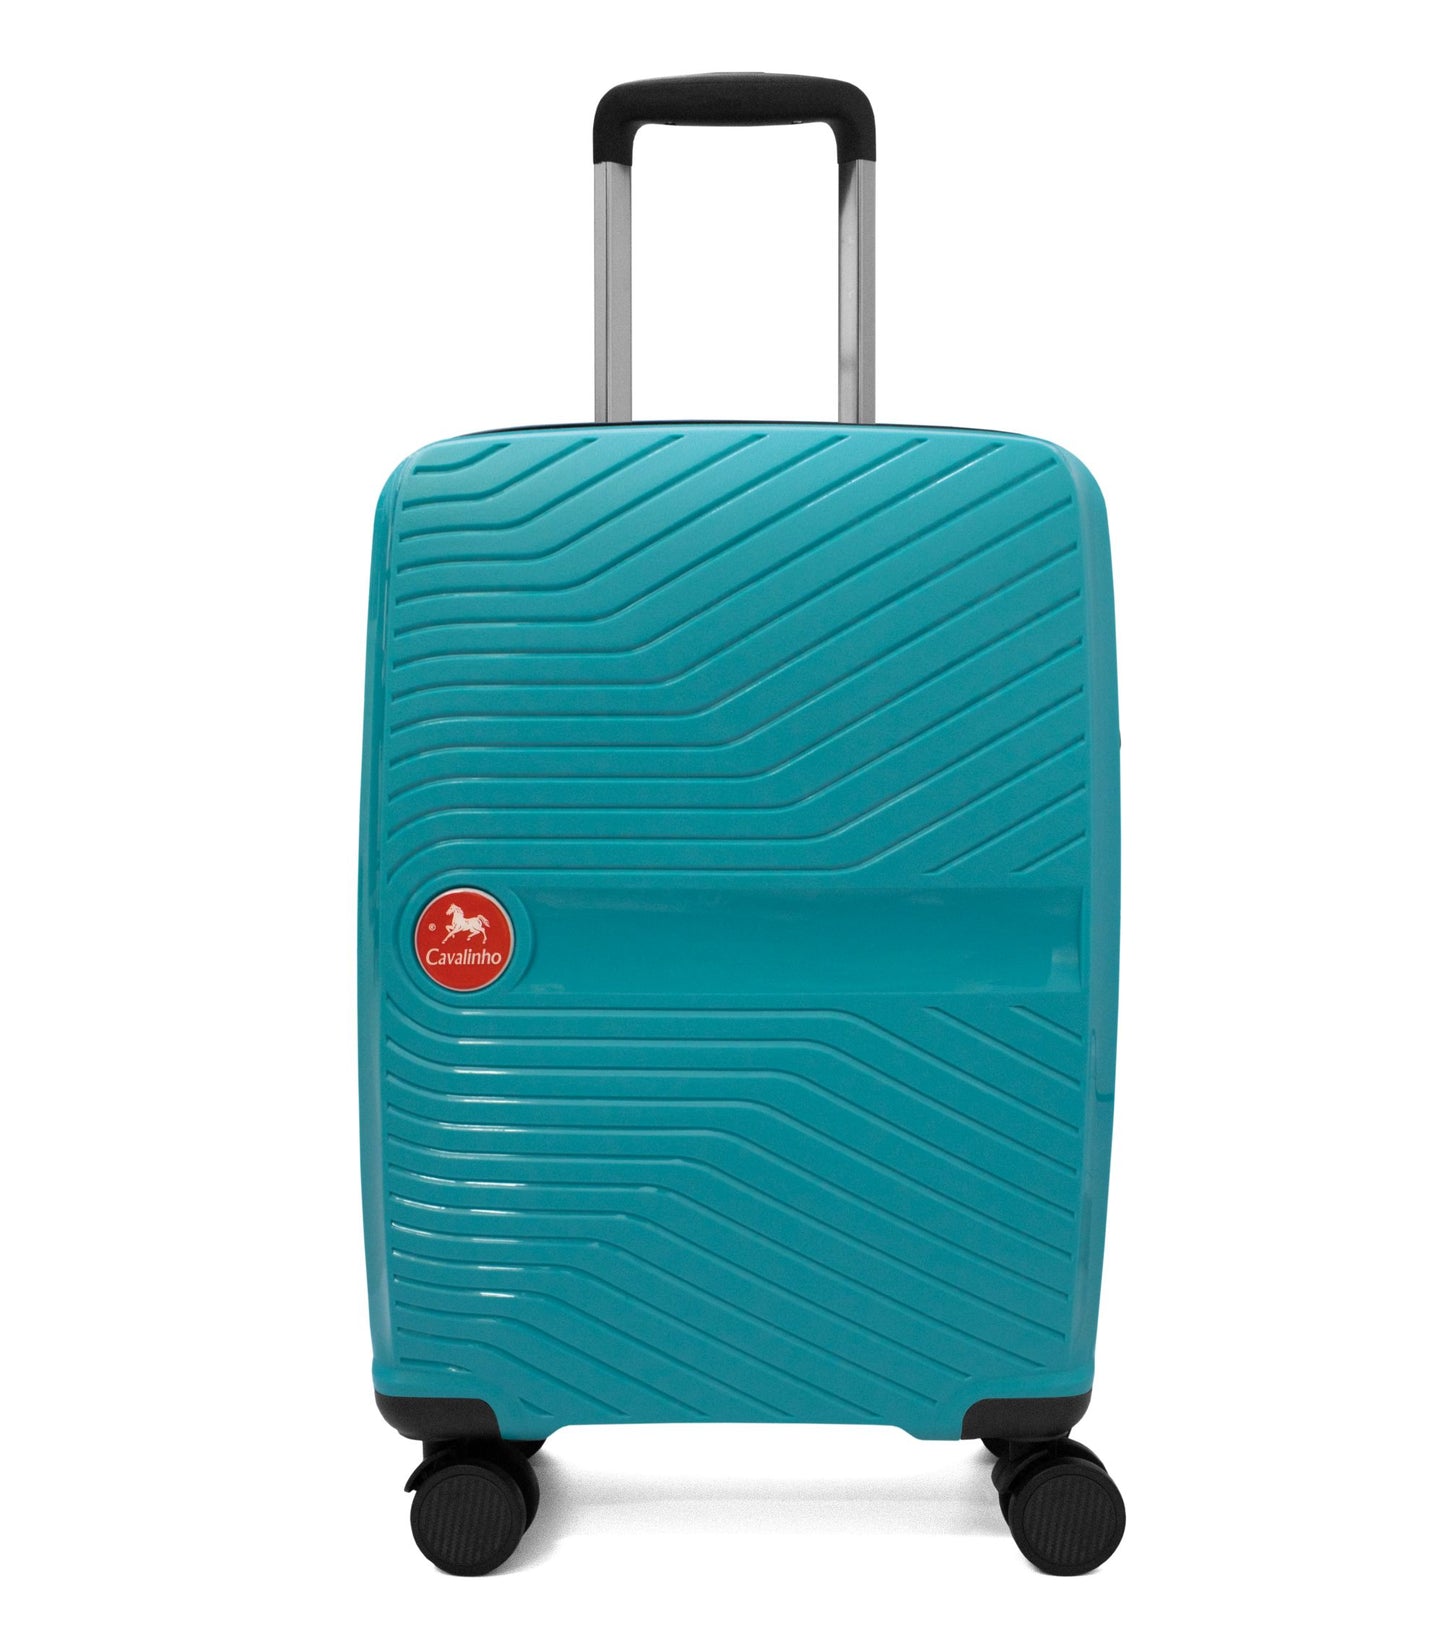 #color_ 19 inch DarkTurquoise | Cavalinho Colorful Carry-on Hardside Luggage (19") - 19 inch DarkTurquoise - 68020004.25.19_1